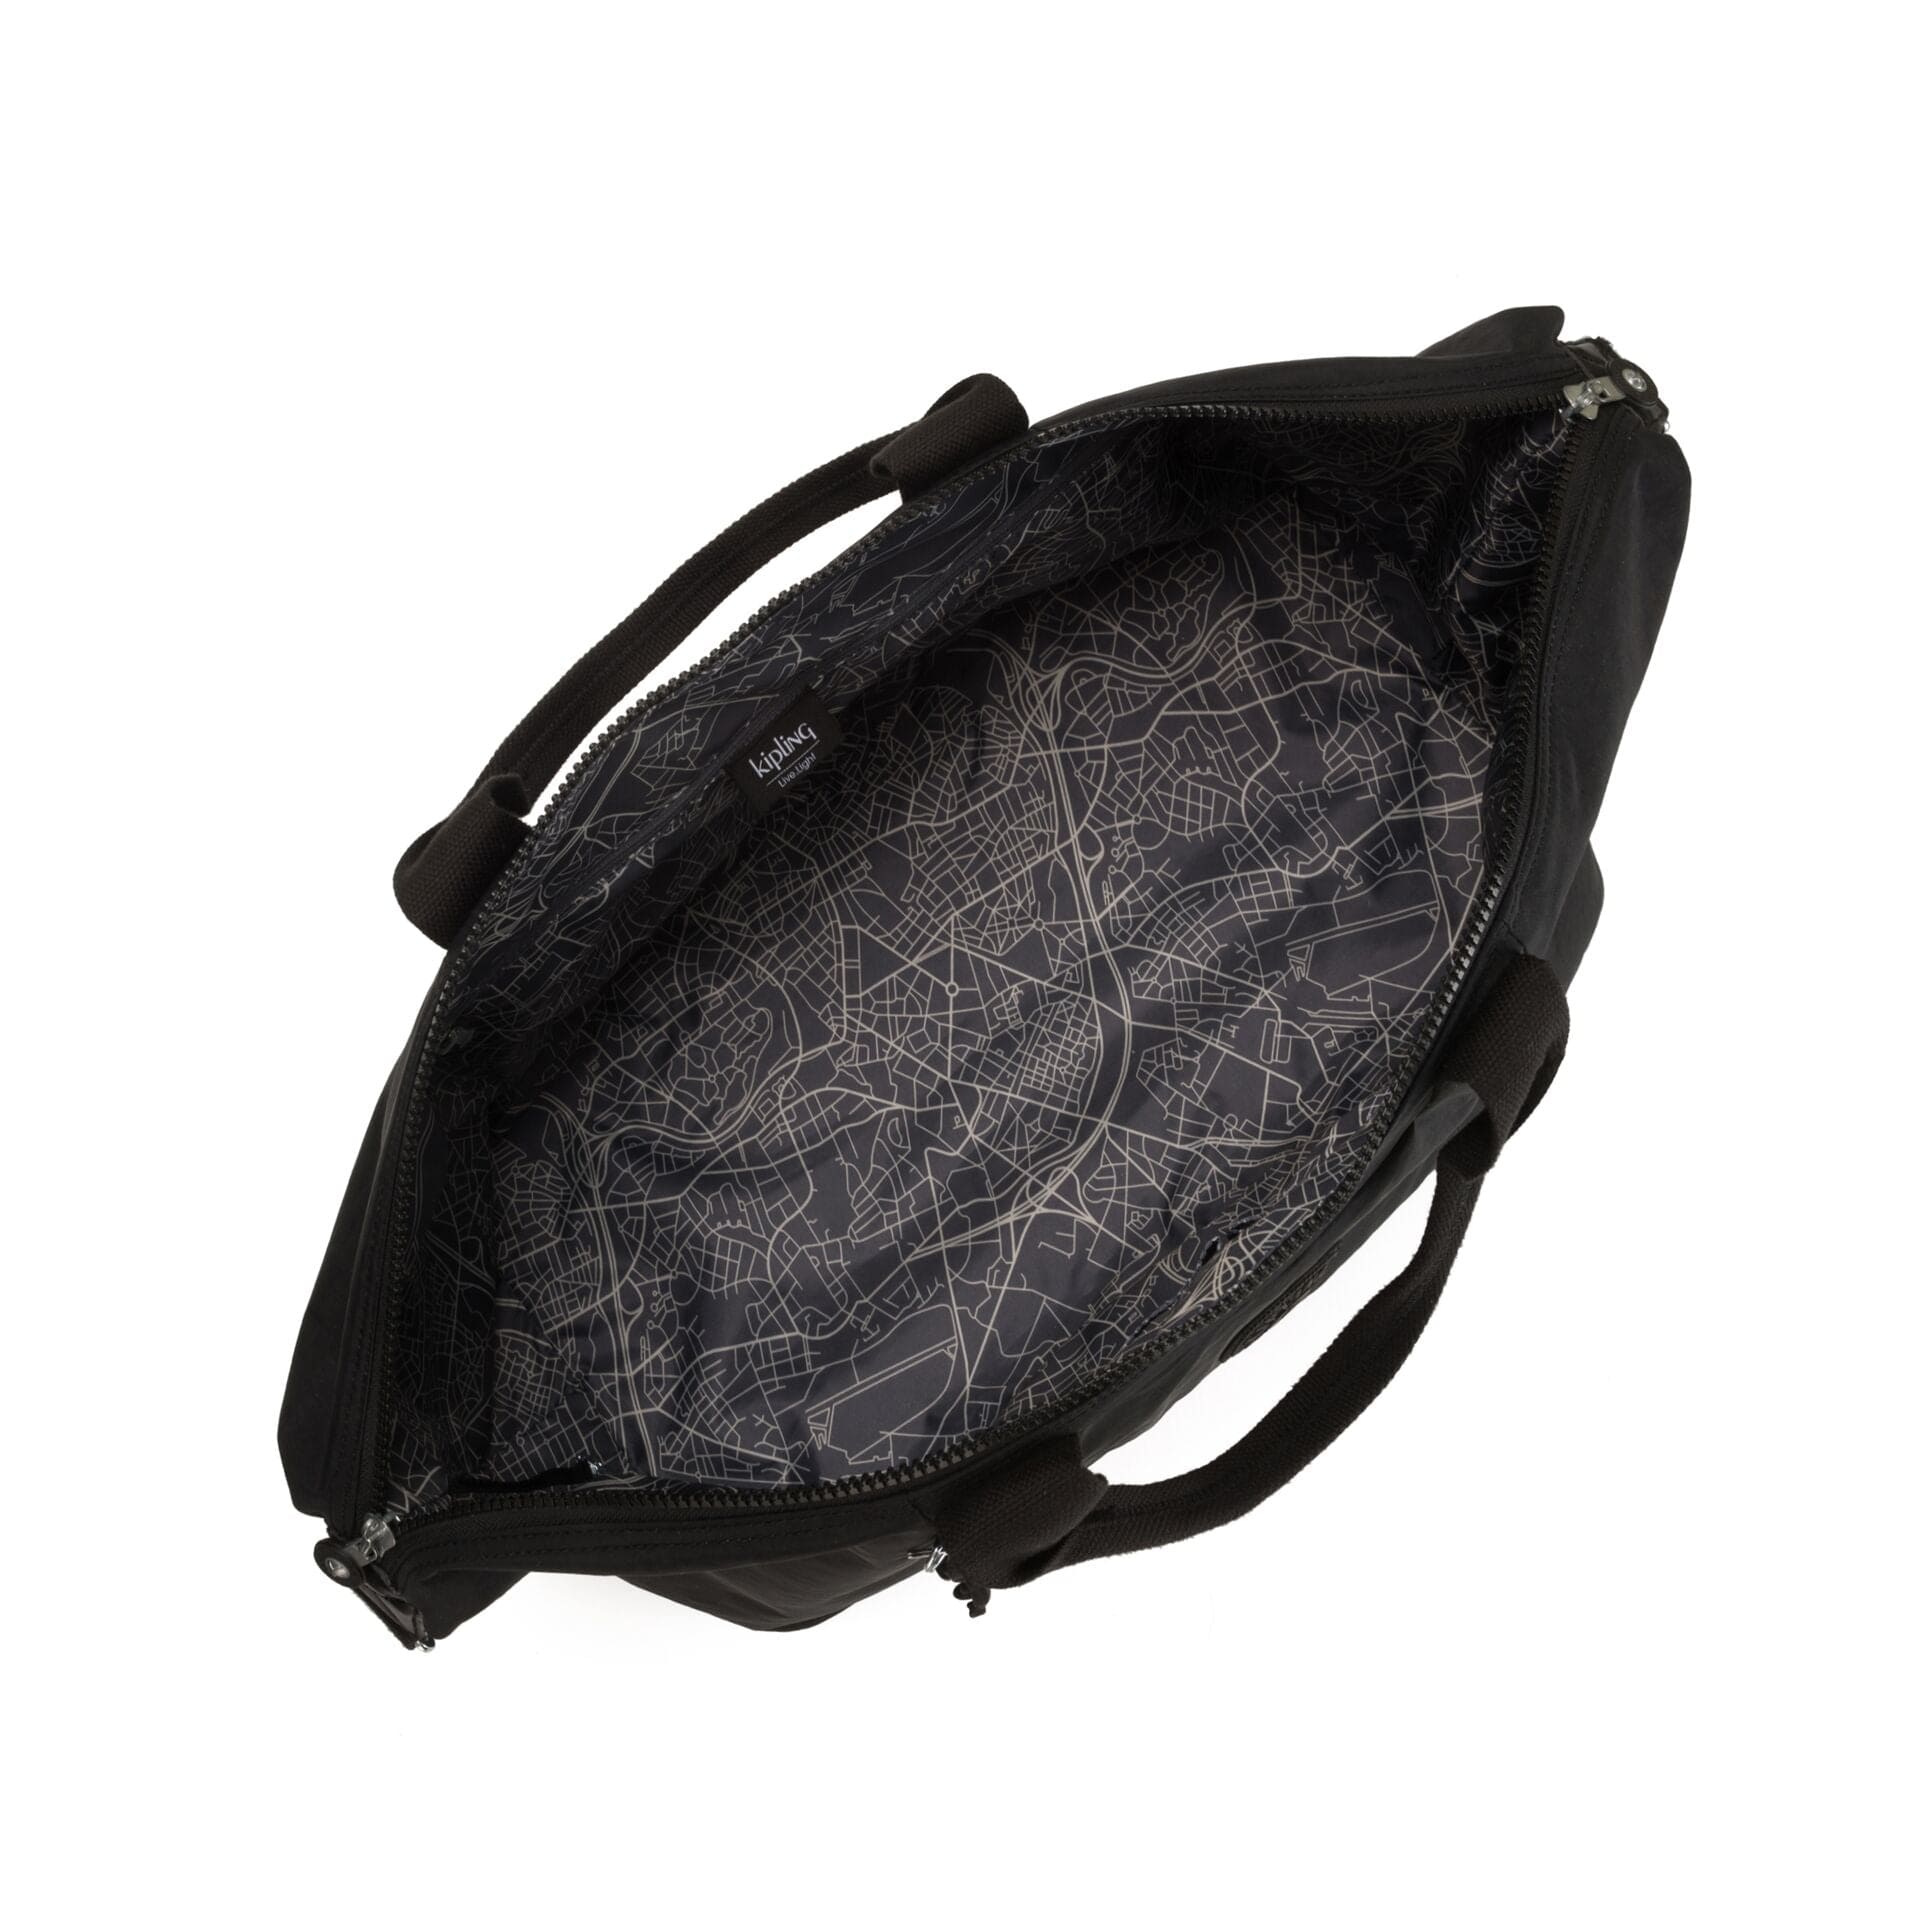 KIPLING-BORI-Large weekender (with removable strap and trolley sleeve)-Black Noir-I4582-P39